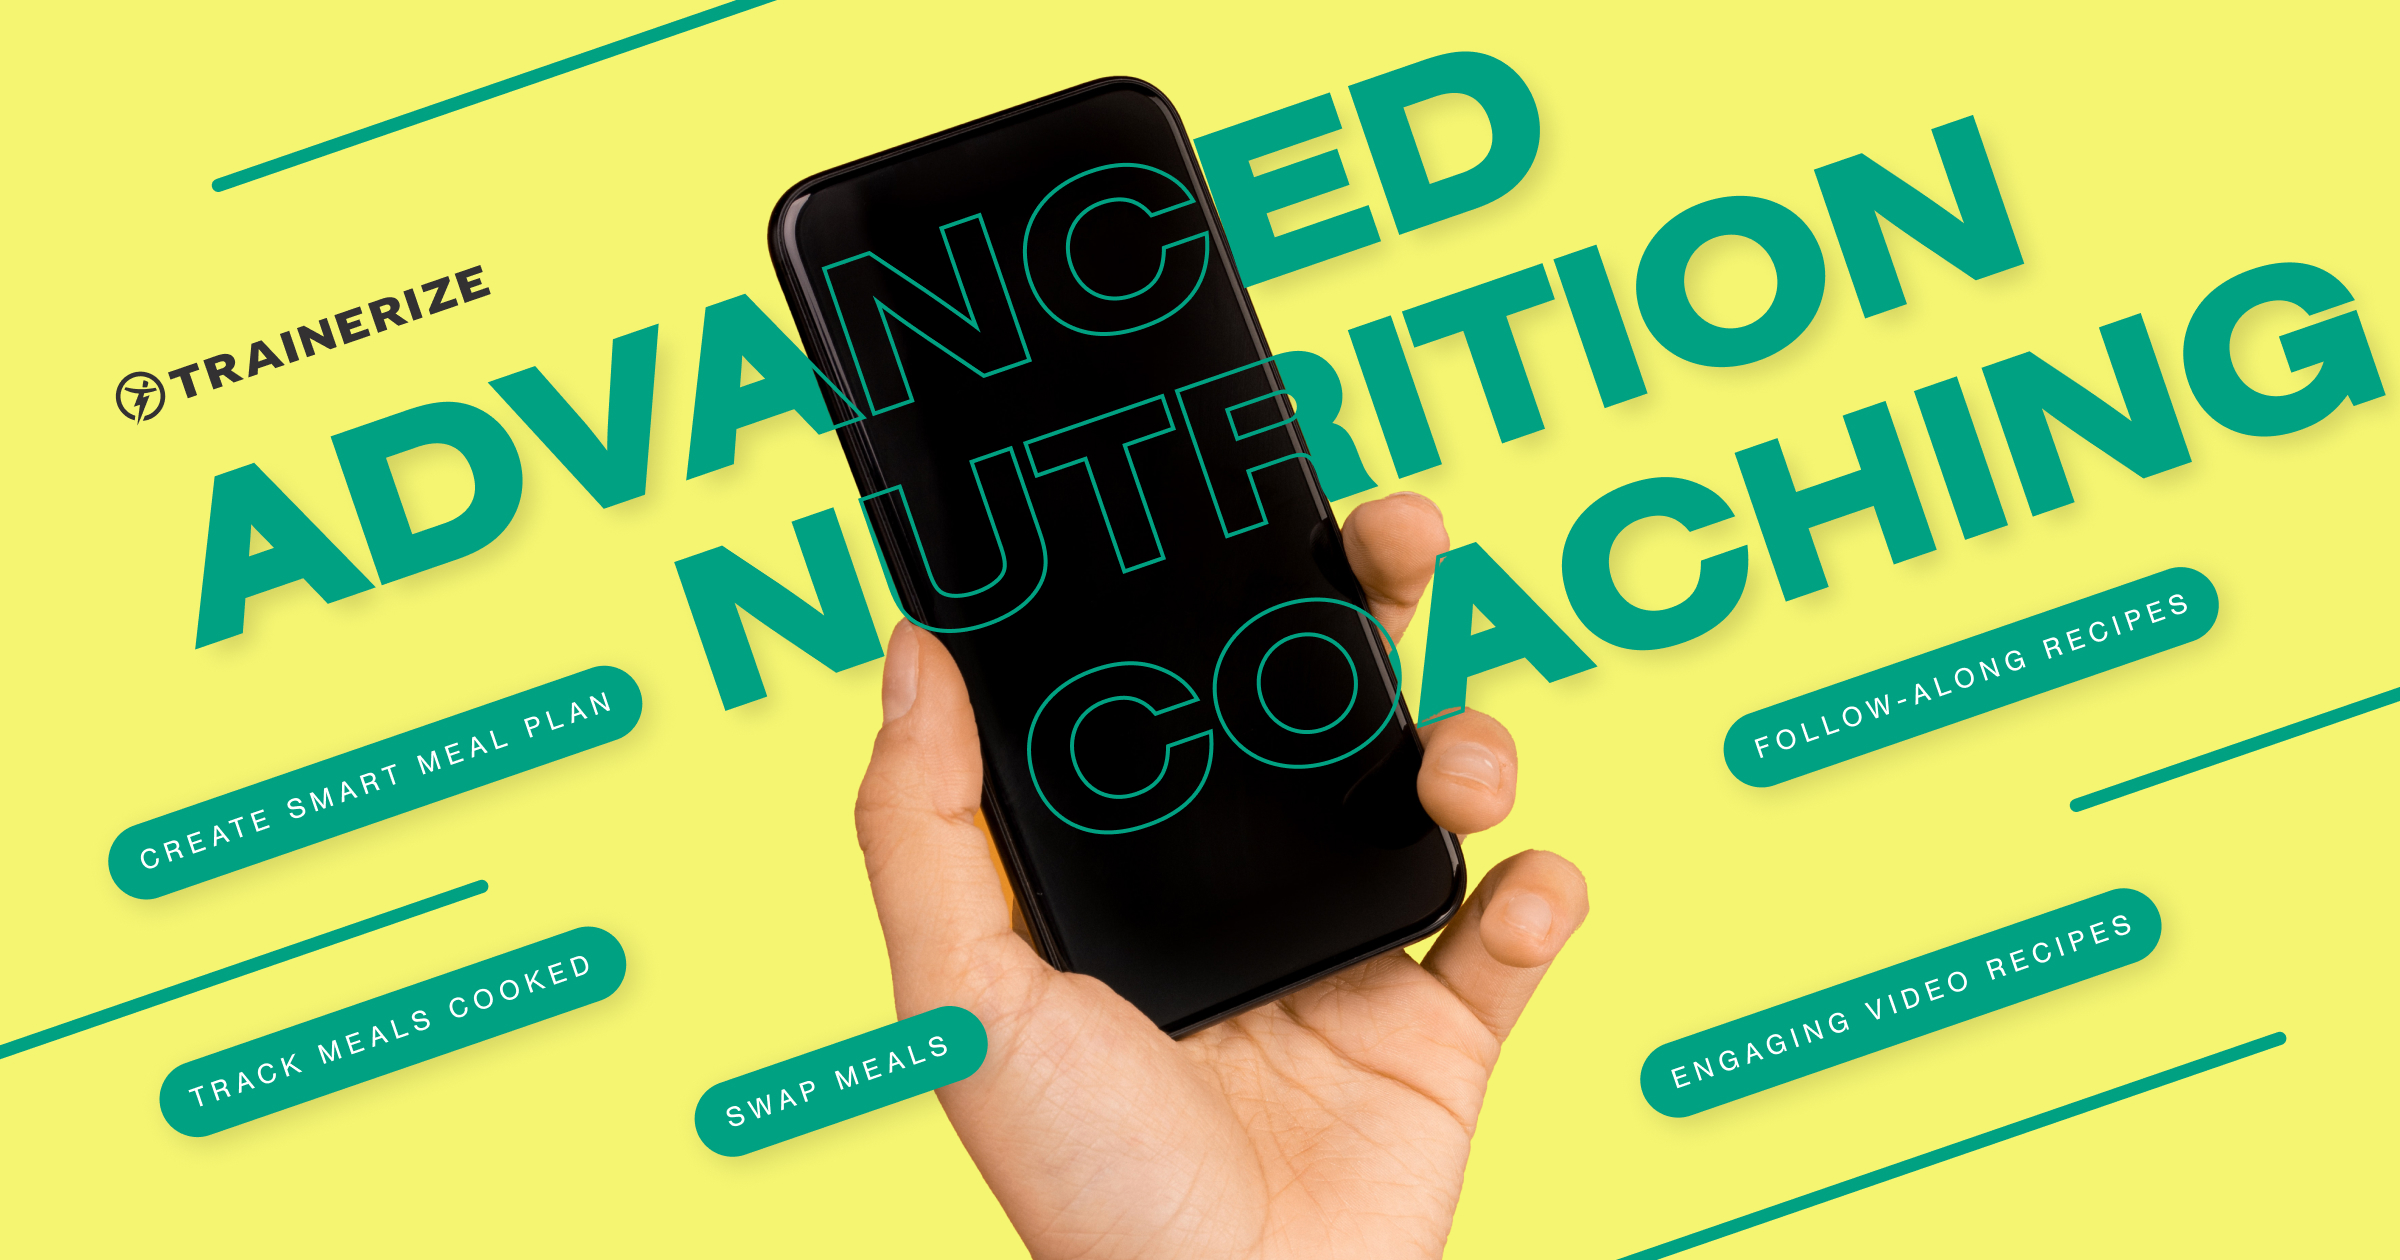 The Advanced Nutrition add-on makes it easy to generate and deliver personalized meal plans in seconds